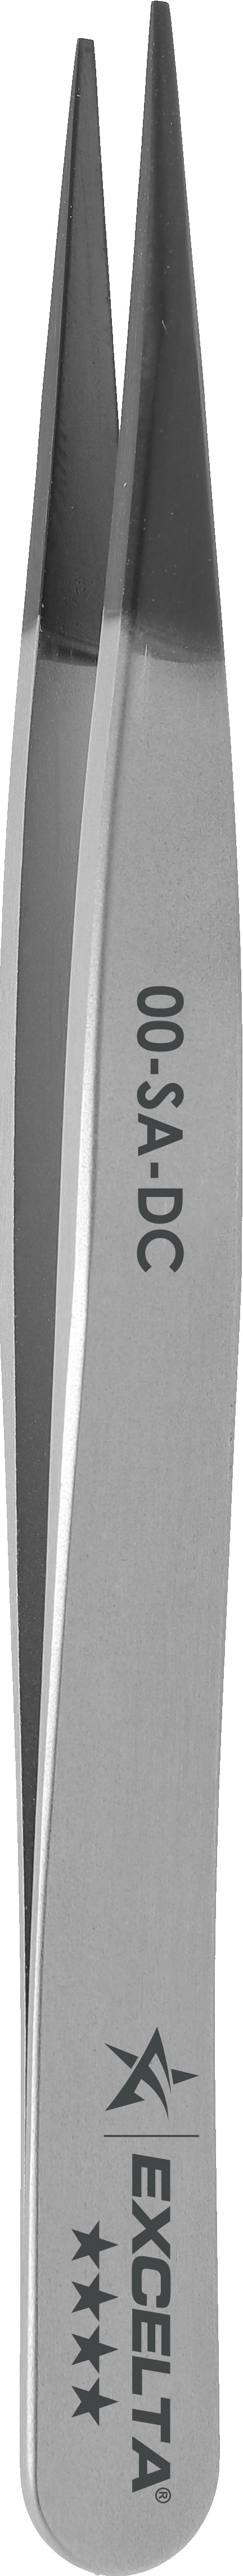 Excelta 00-SA-DC Tweezers - 4 Star Straight Strong Medium Point - Anti-Mag. SS - Diamond Coated